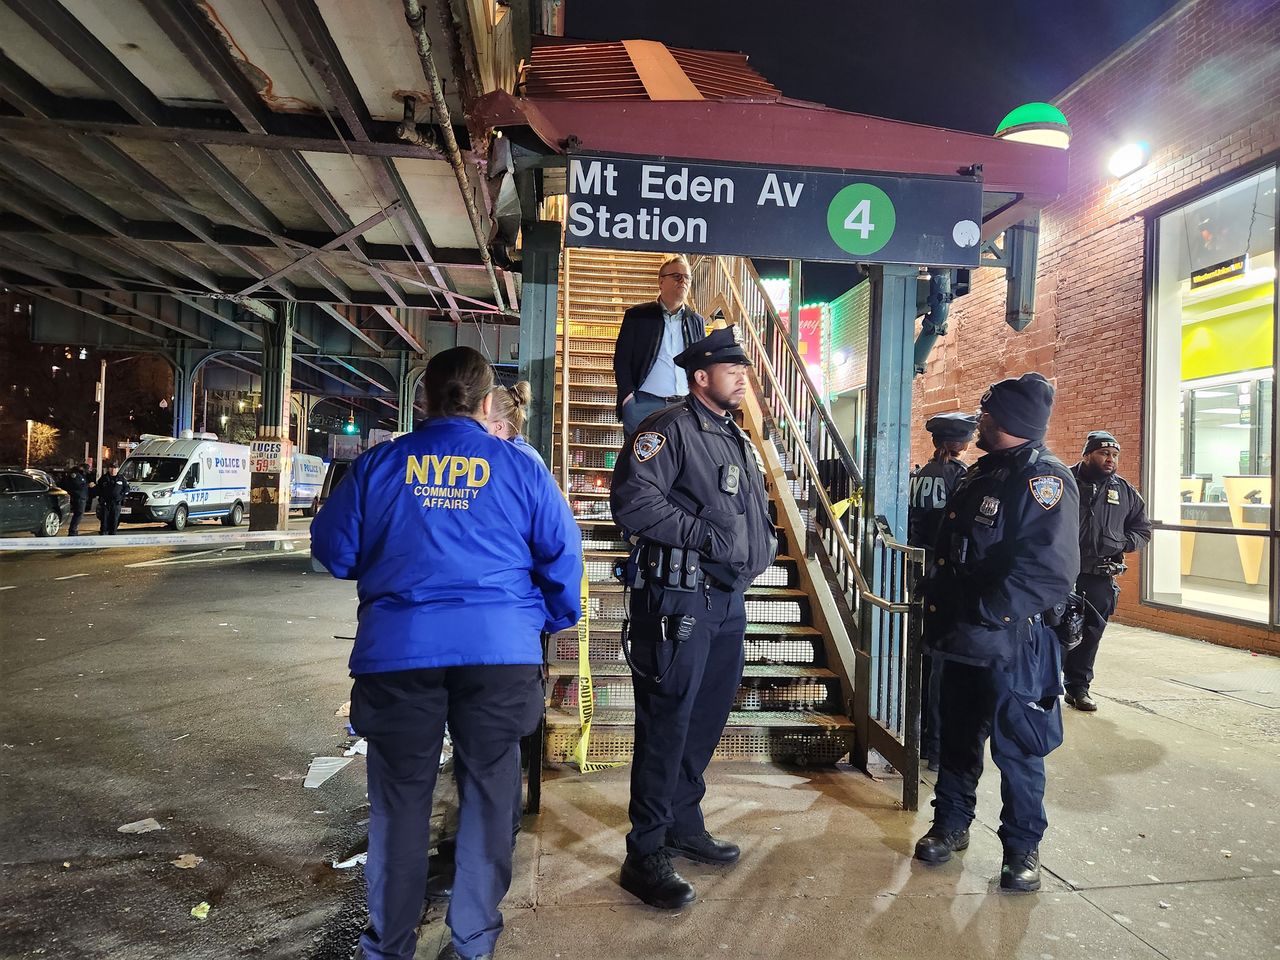 New York subway shooting, one death and five injuries